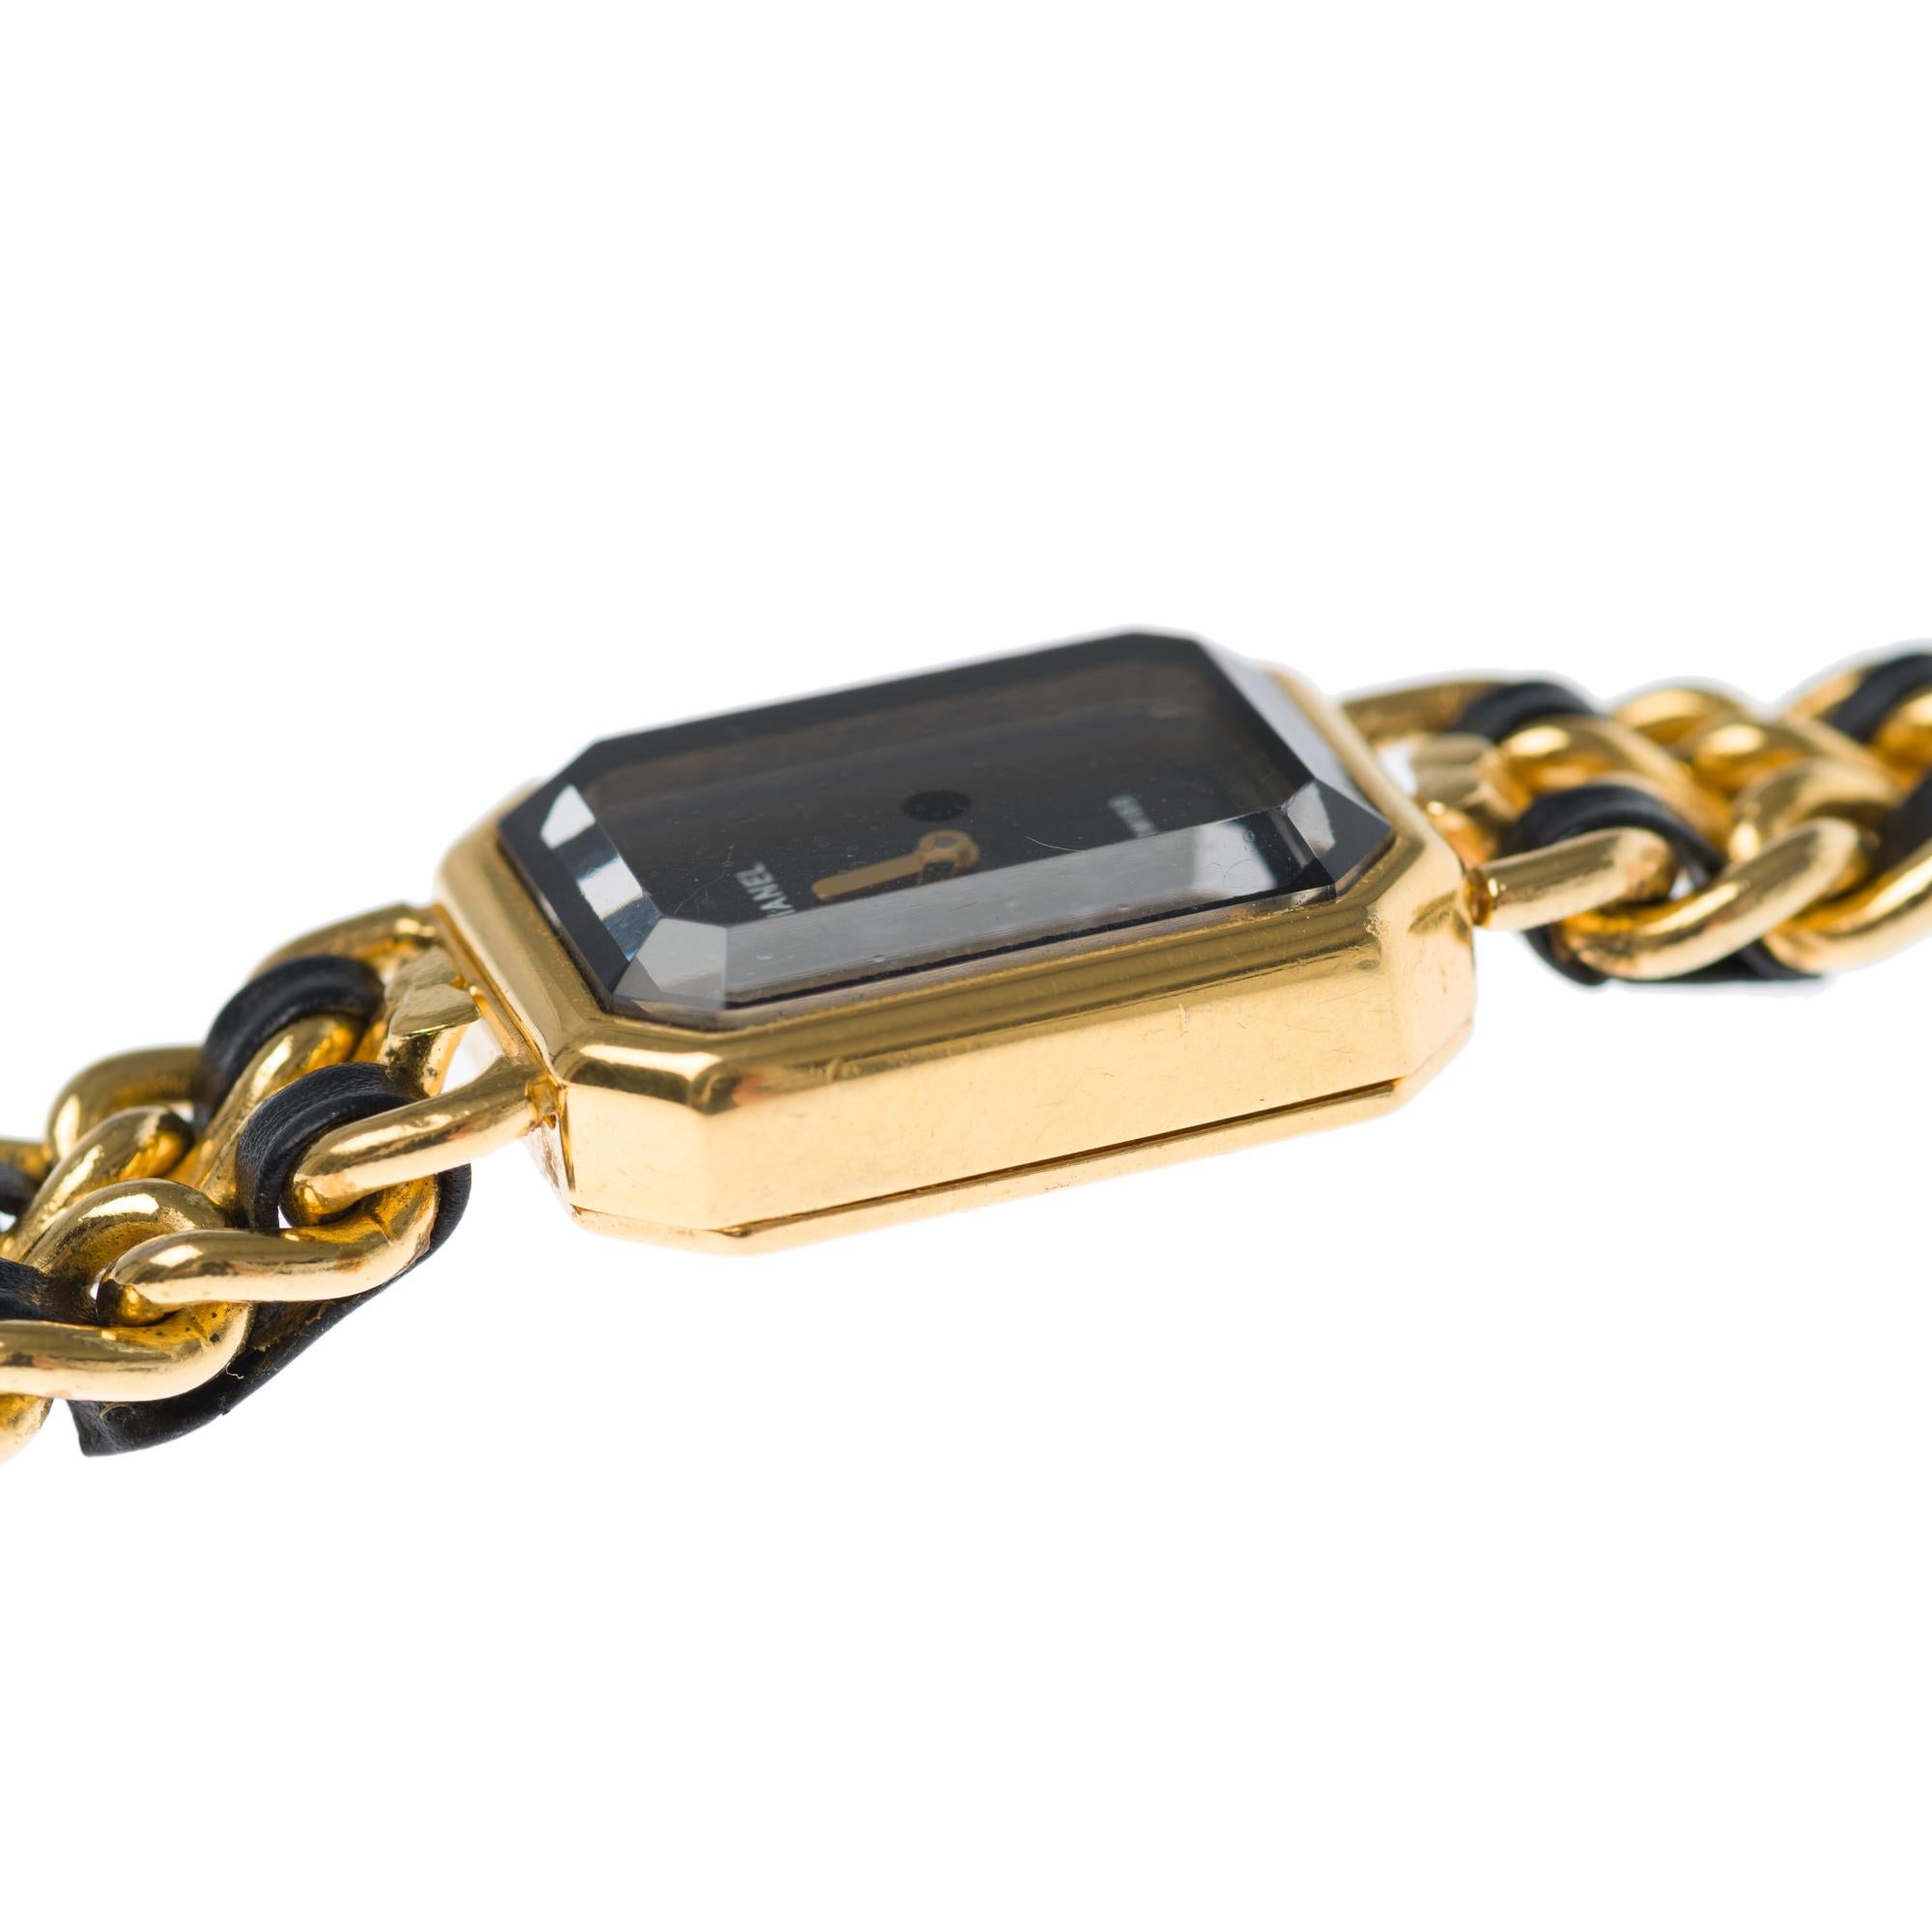 Modern Amazing Chanel Première lady wristwatch in yellow gold plated